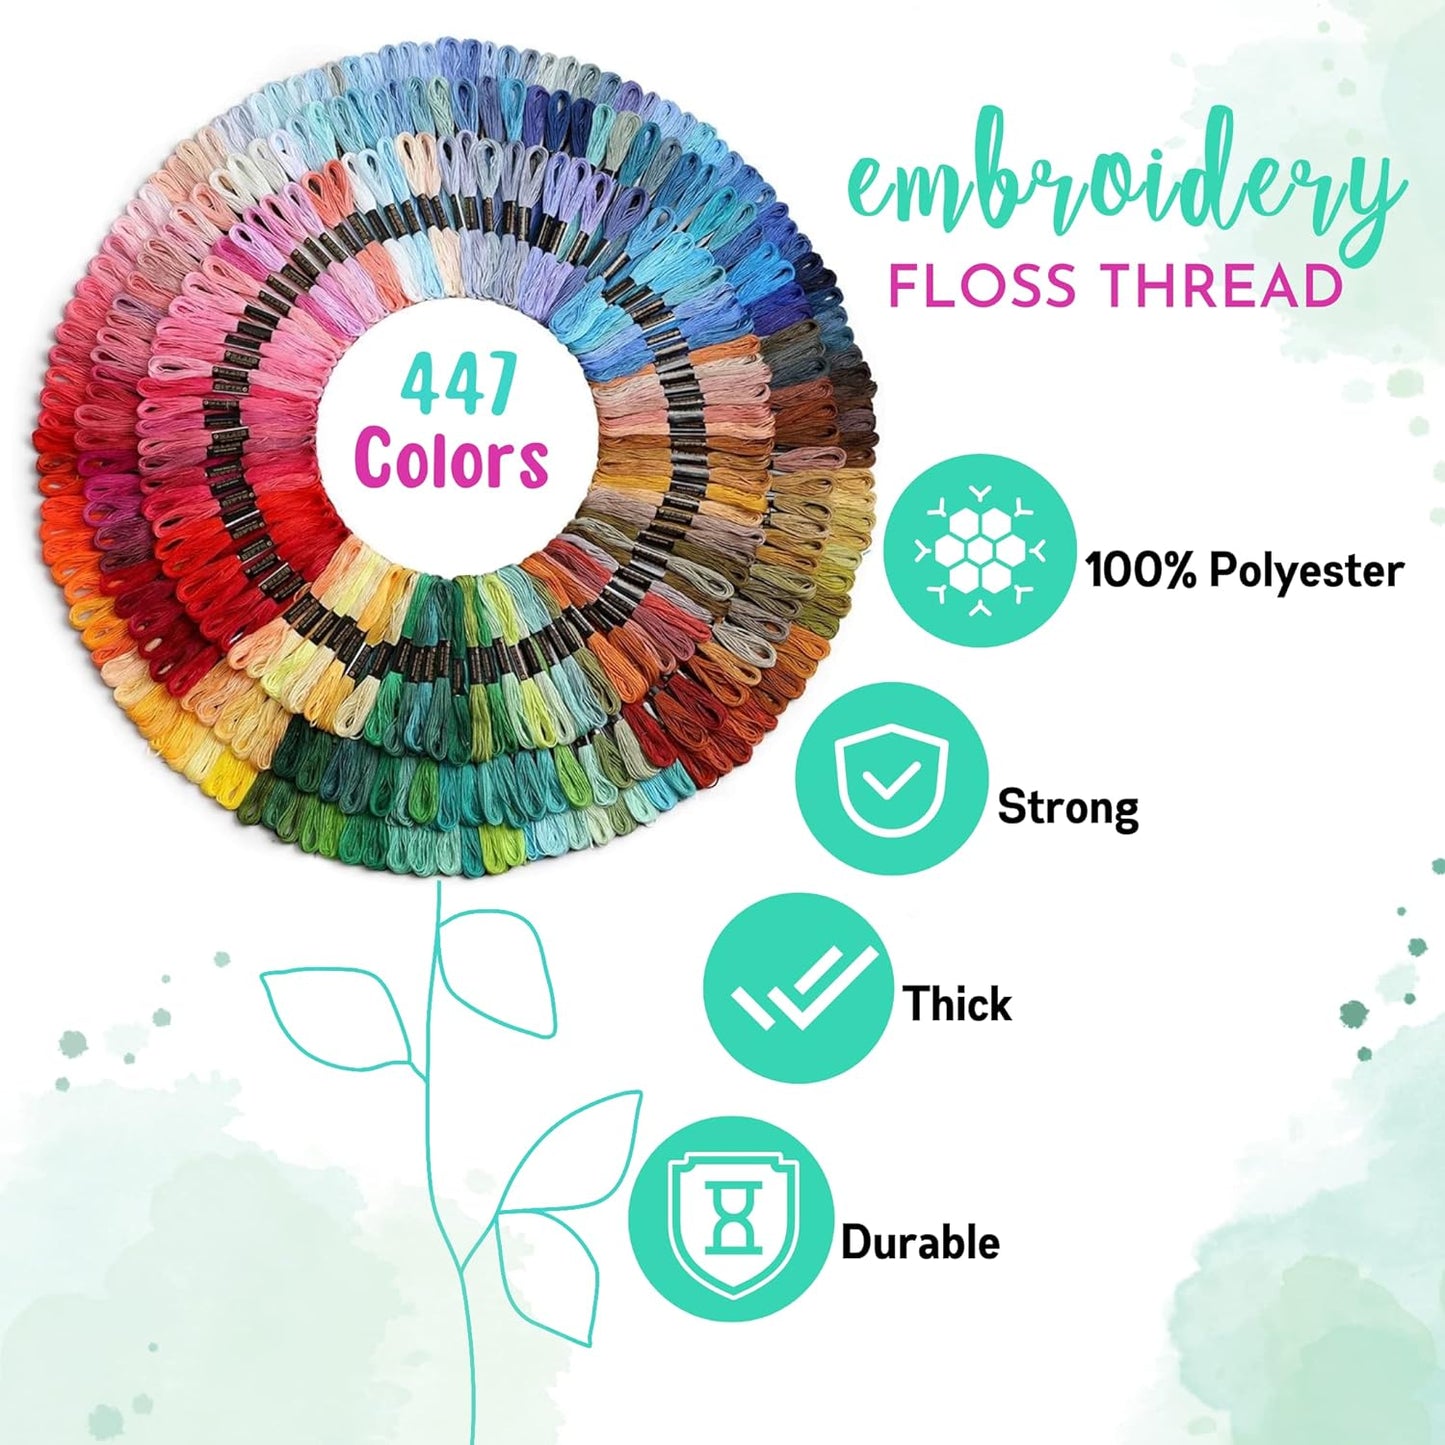 Athena’S Elements Embroidery Thread | Rainbow Themed Embroidery Floss for Friendship Bracelet String, Cross Stitch Thread, Crafting Arts Embroidery Strings, Friendship Bracelet Thread